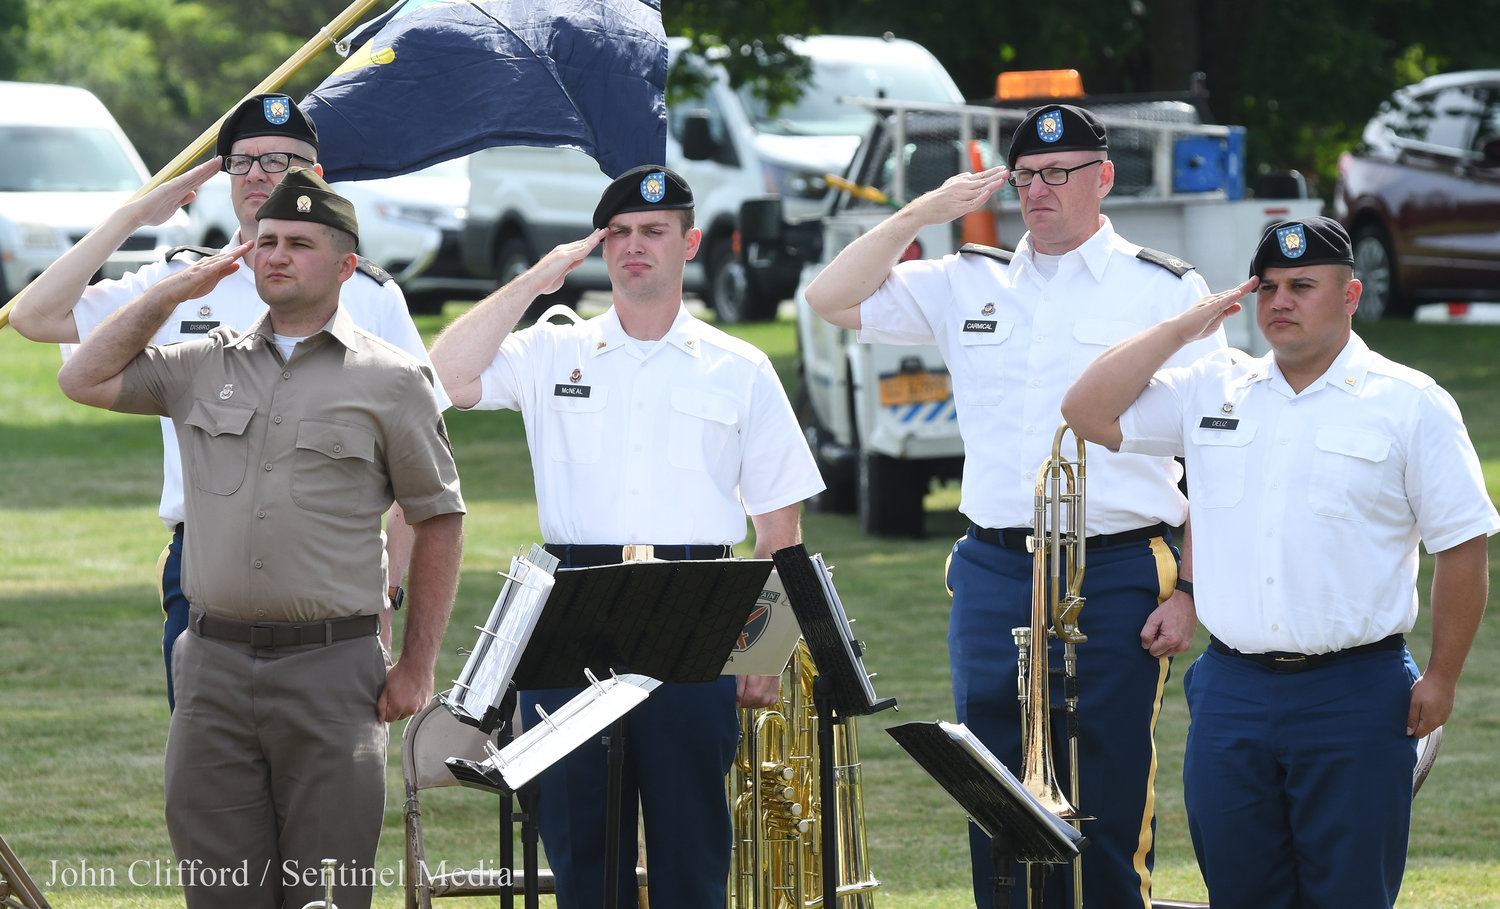 The 10th Mountain Division band members salute during the playing of the National Anthem.